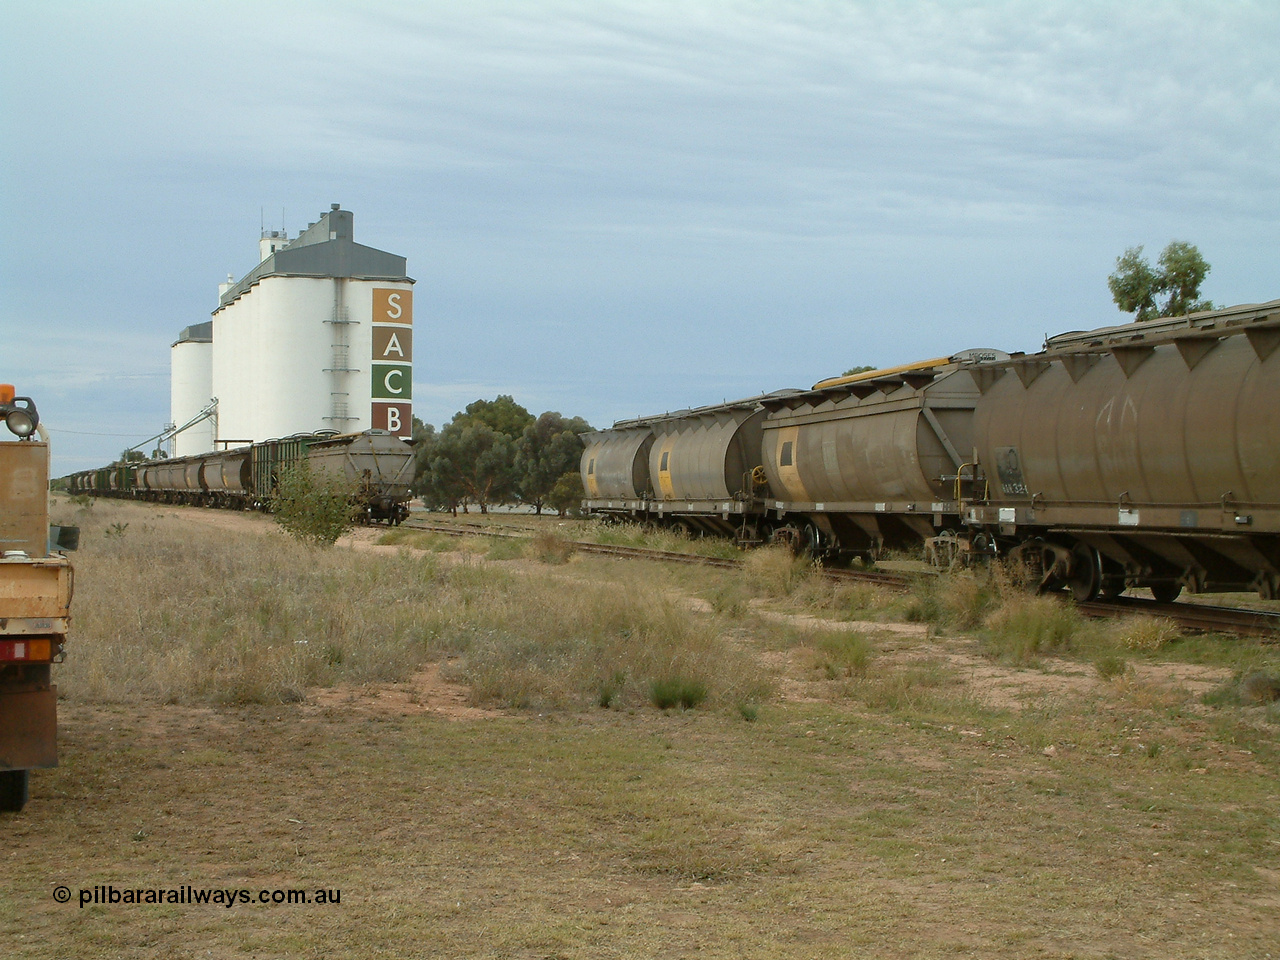 030407 082655
Wudinna, view looking south as the empty rake of bogie grain waggons is shunted into the siding for loading, showing HAN and HCN types of bogie grain hoppers. Concrete SACBH grain complex. 7th April 2003.
Keywords: HAN-type;HCN-type;SAR-Islington-WS;Tulloch-Ltd-NSW;